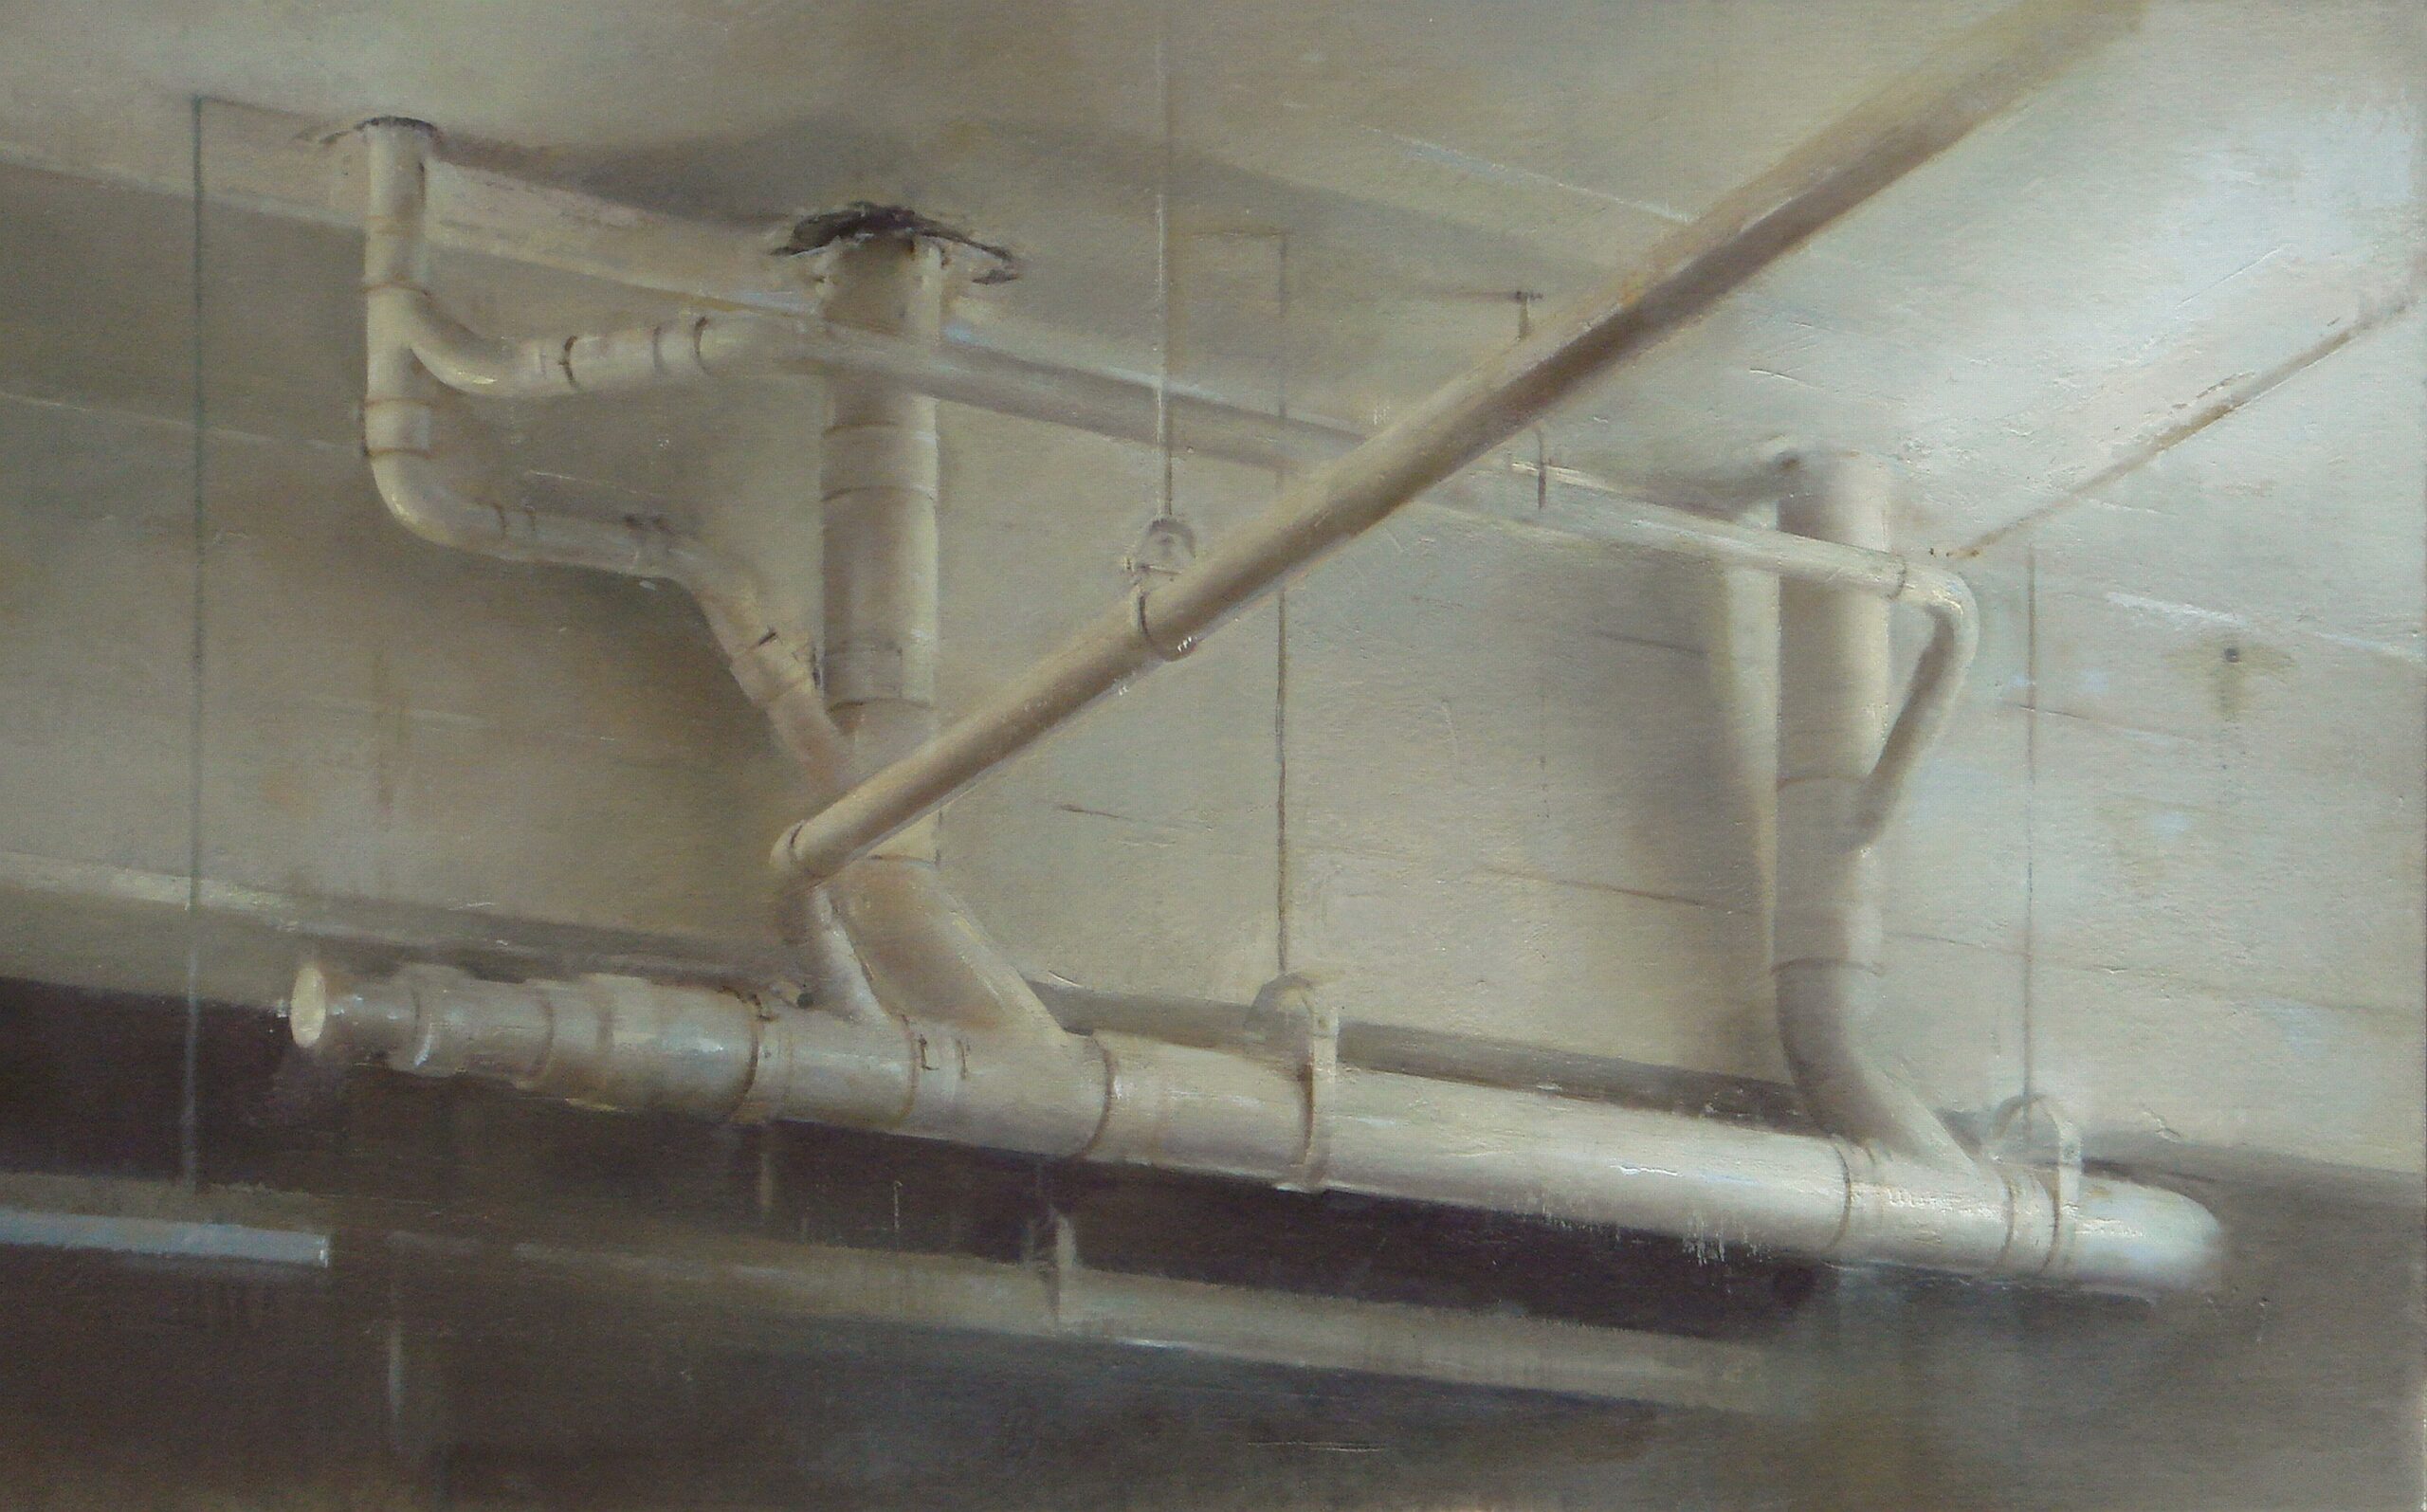 Christopher Gallego, "Ceiling Pipes," 2012, oil on canvas, 15 x 24 in.